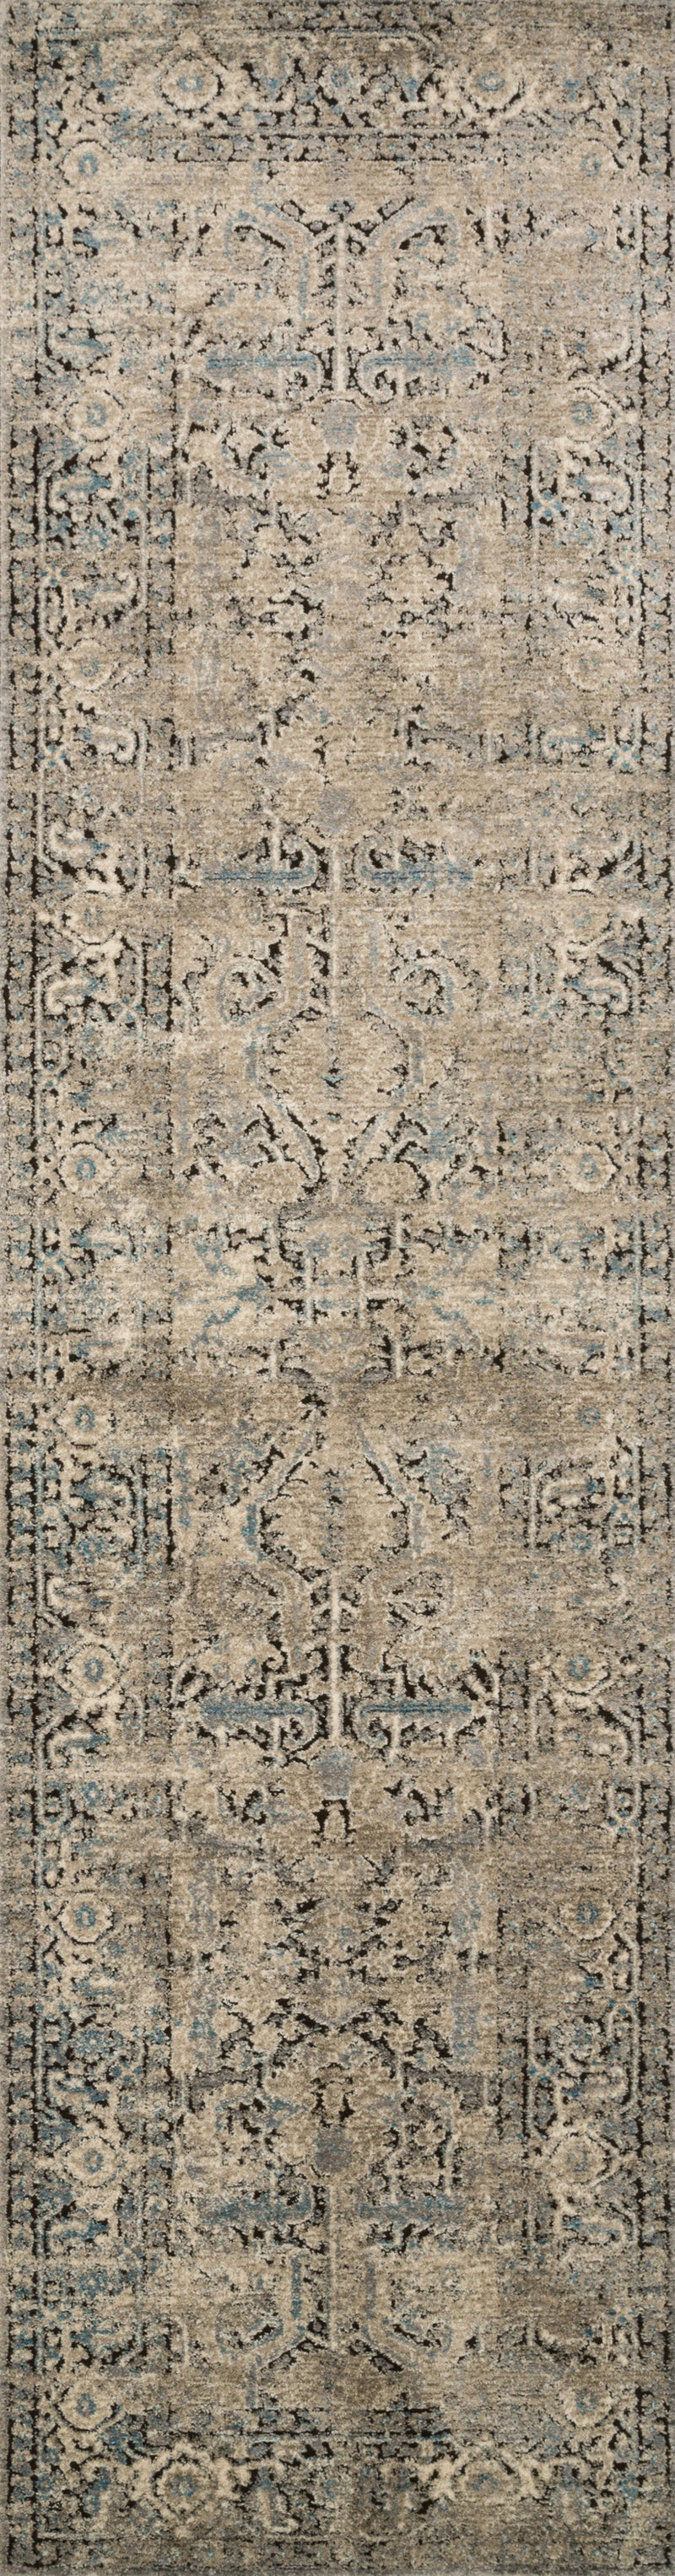 MILLENNIUM Collection Rug  in  GREY / STONE Gray Accent Power-Loomed Jute/Hemp